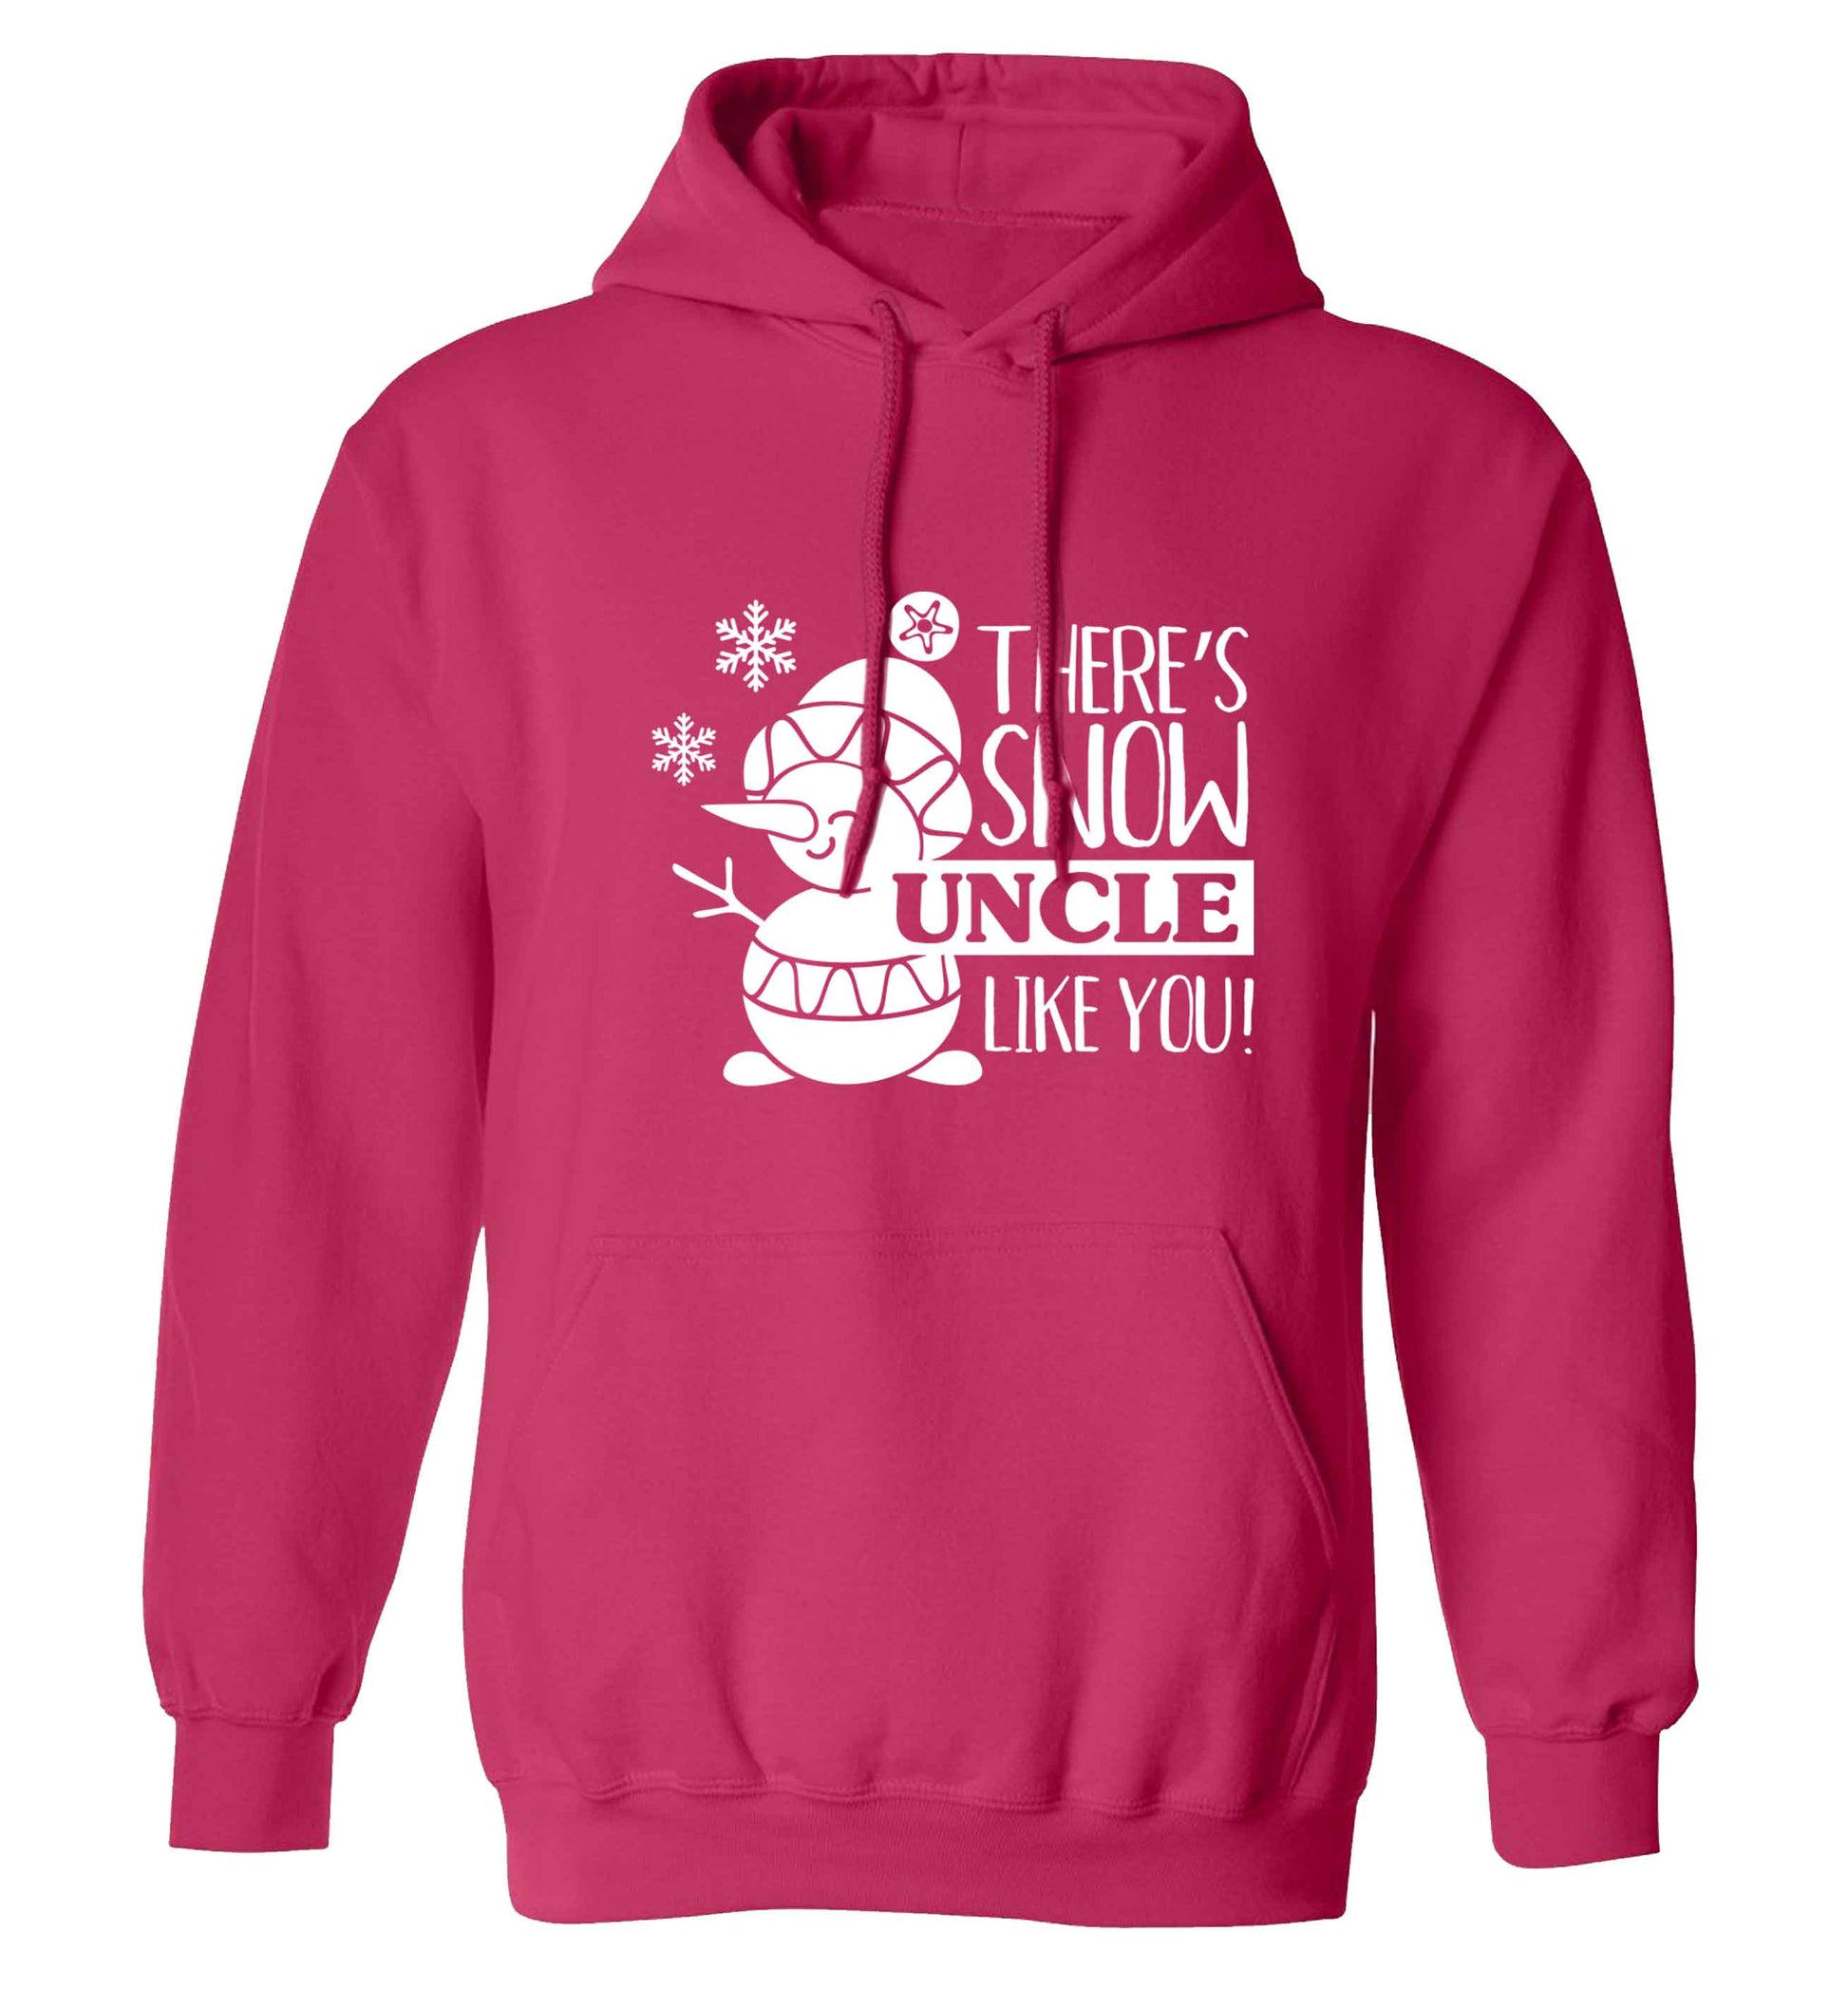 There's snow uncle like you adults unisex pink hoodie 2XL